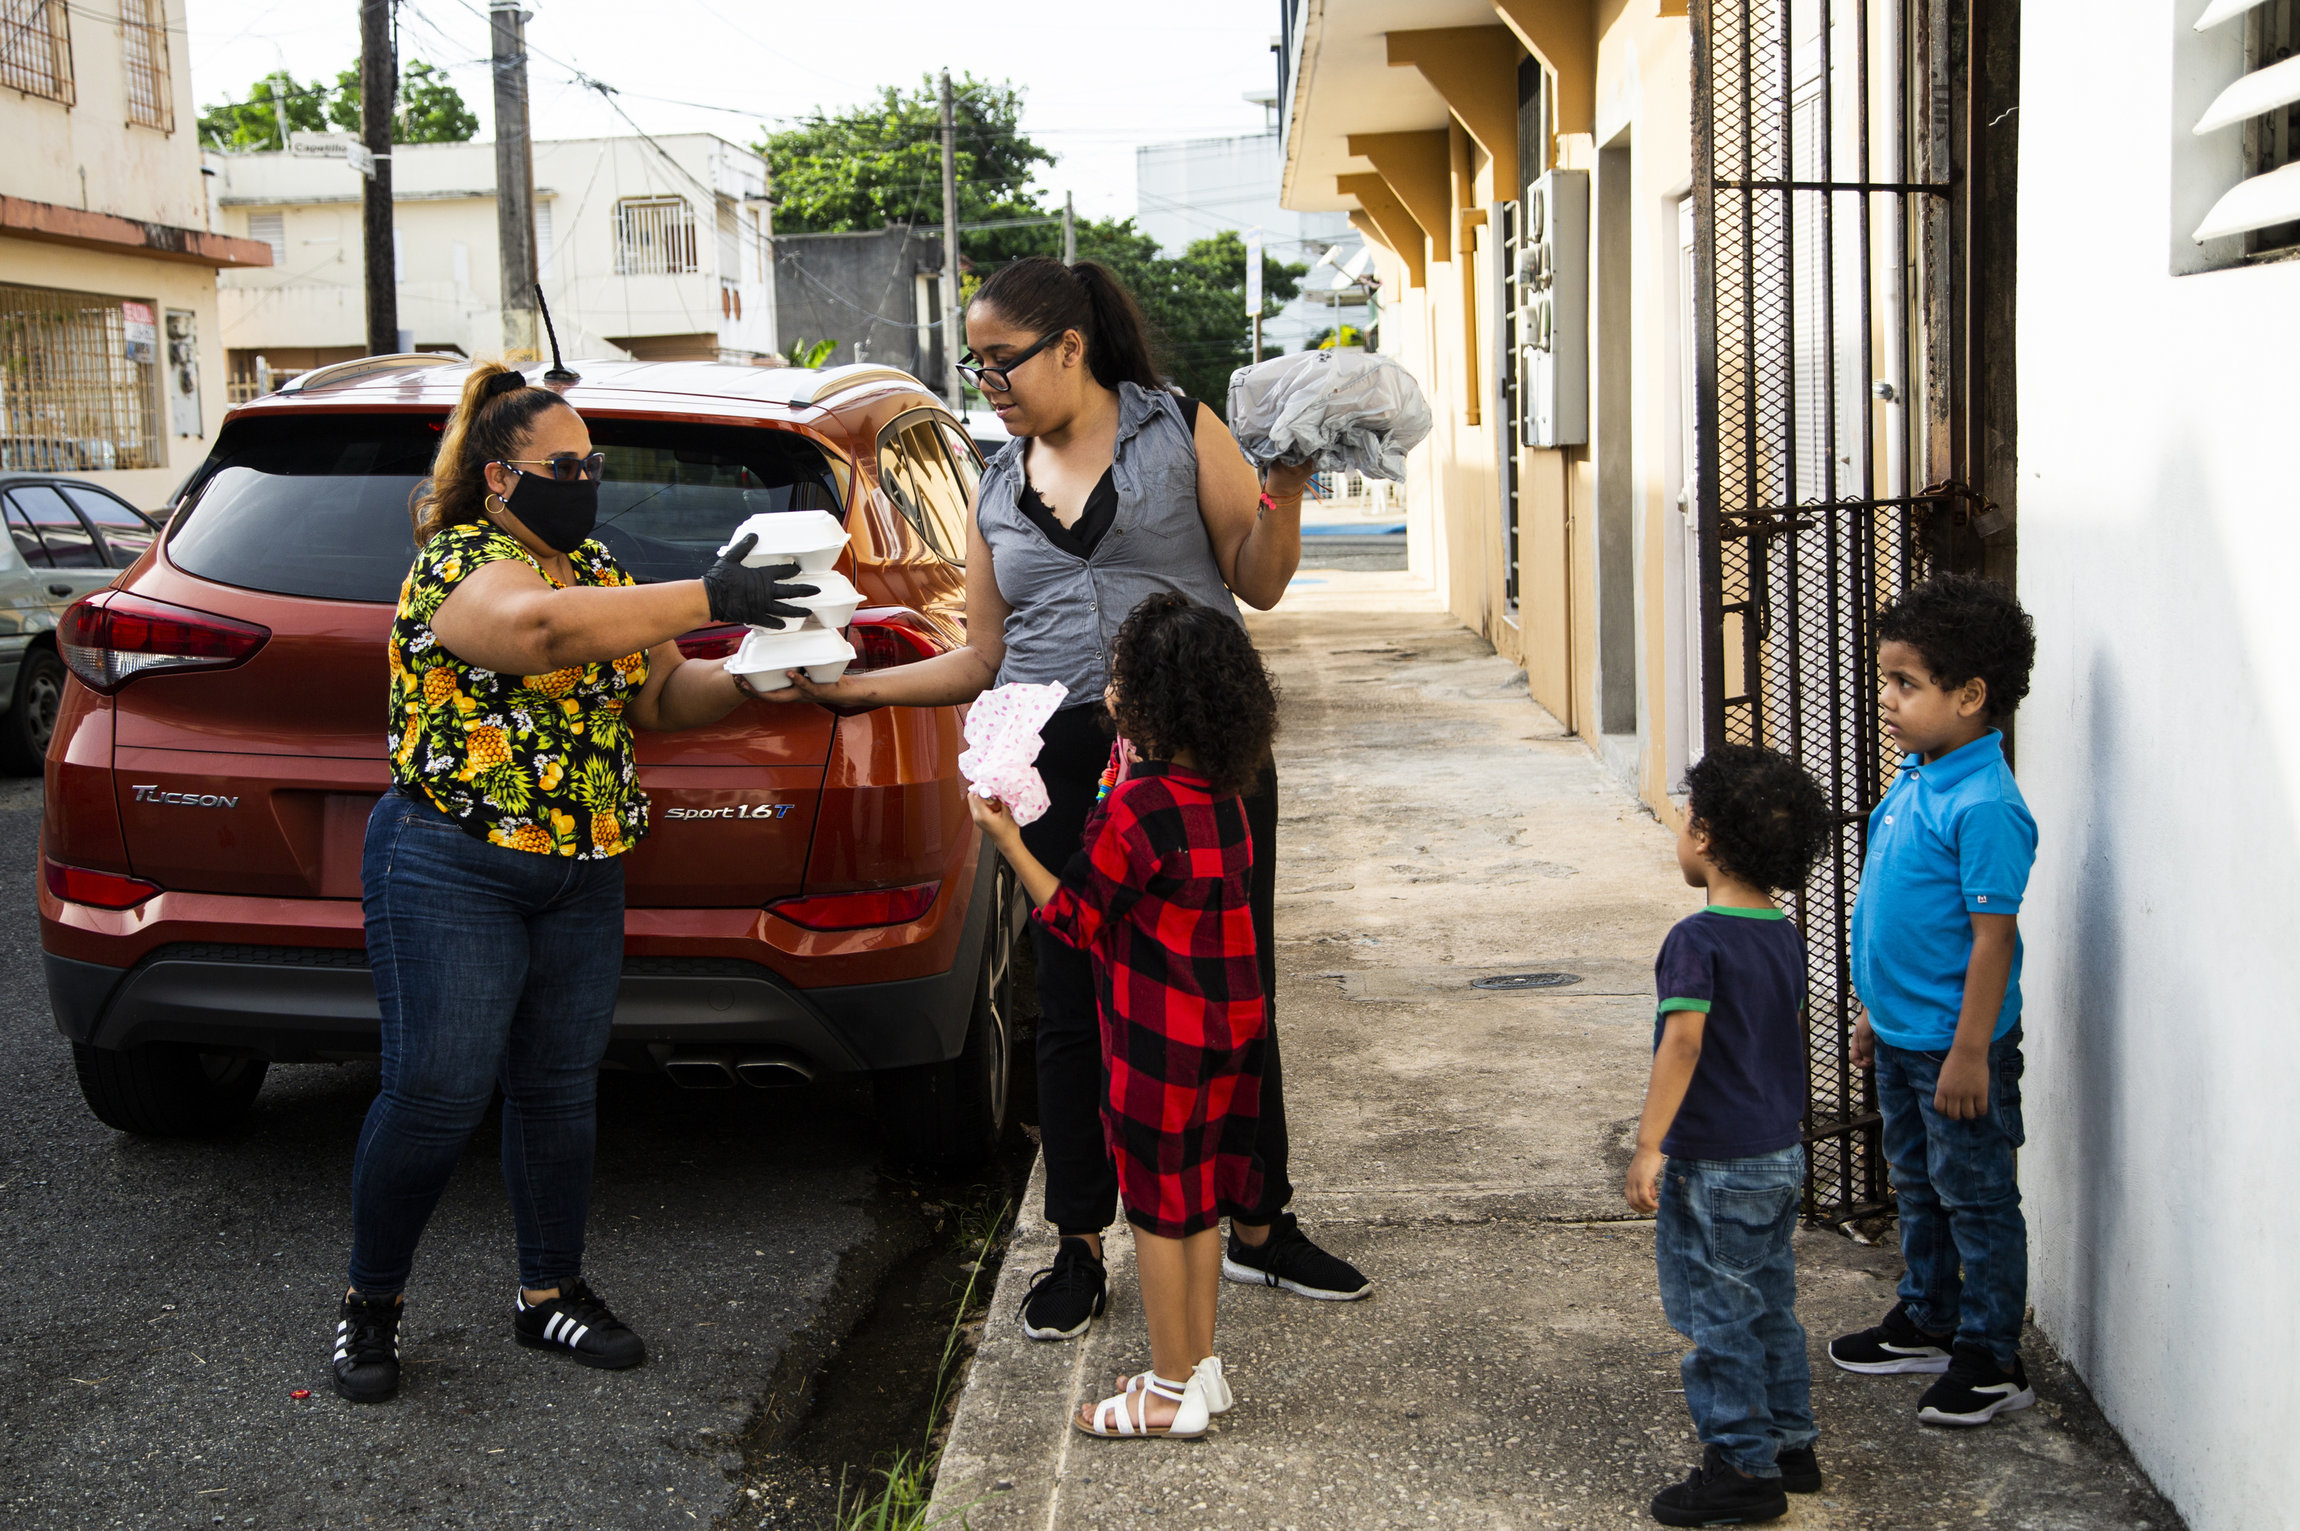 Christel Galindez Garcia, in a mask and gloves, passes a stack of white clamshell food containers to Elia Gonzalez, who stands next to her three young children, next to a parked car and near a doorway.